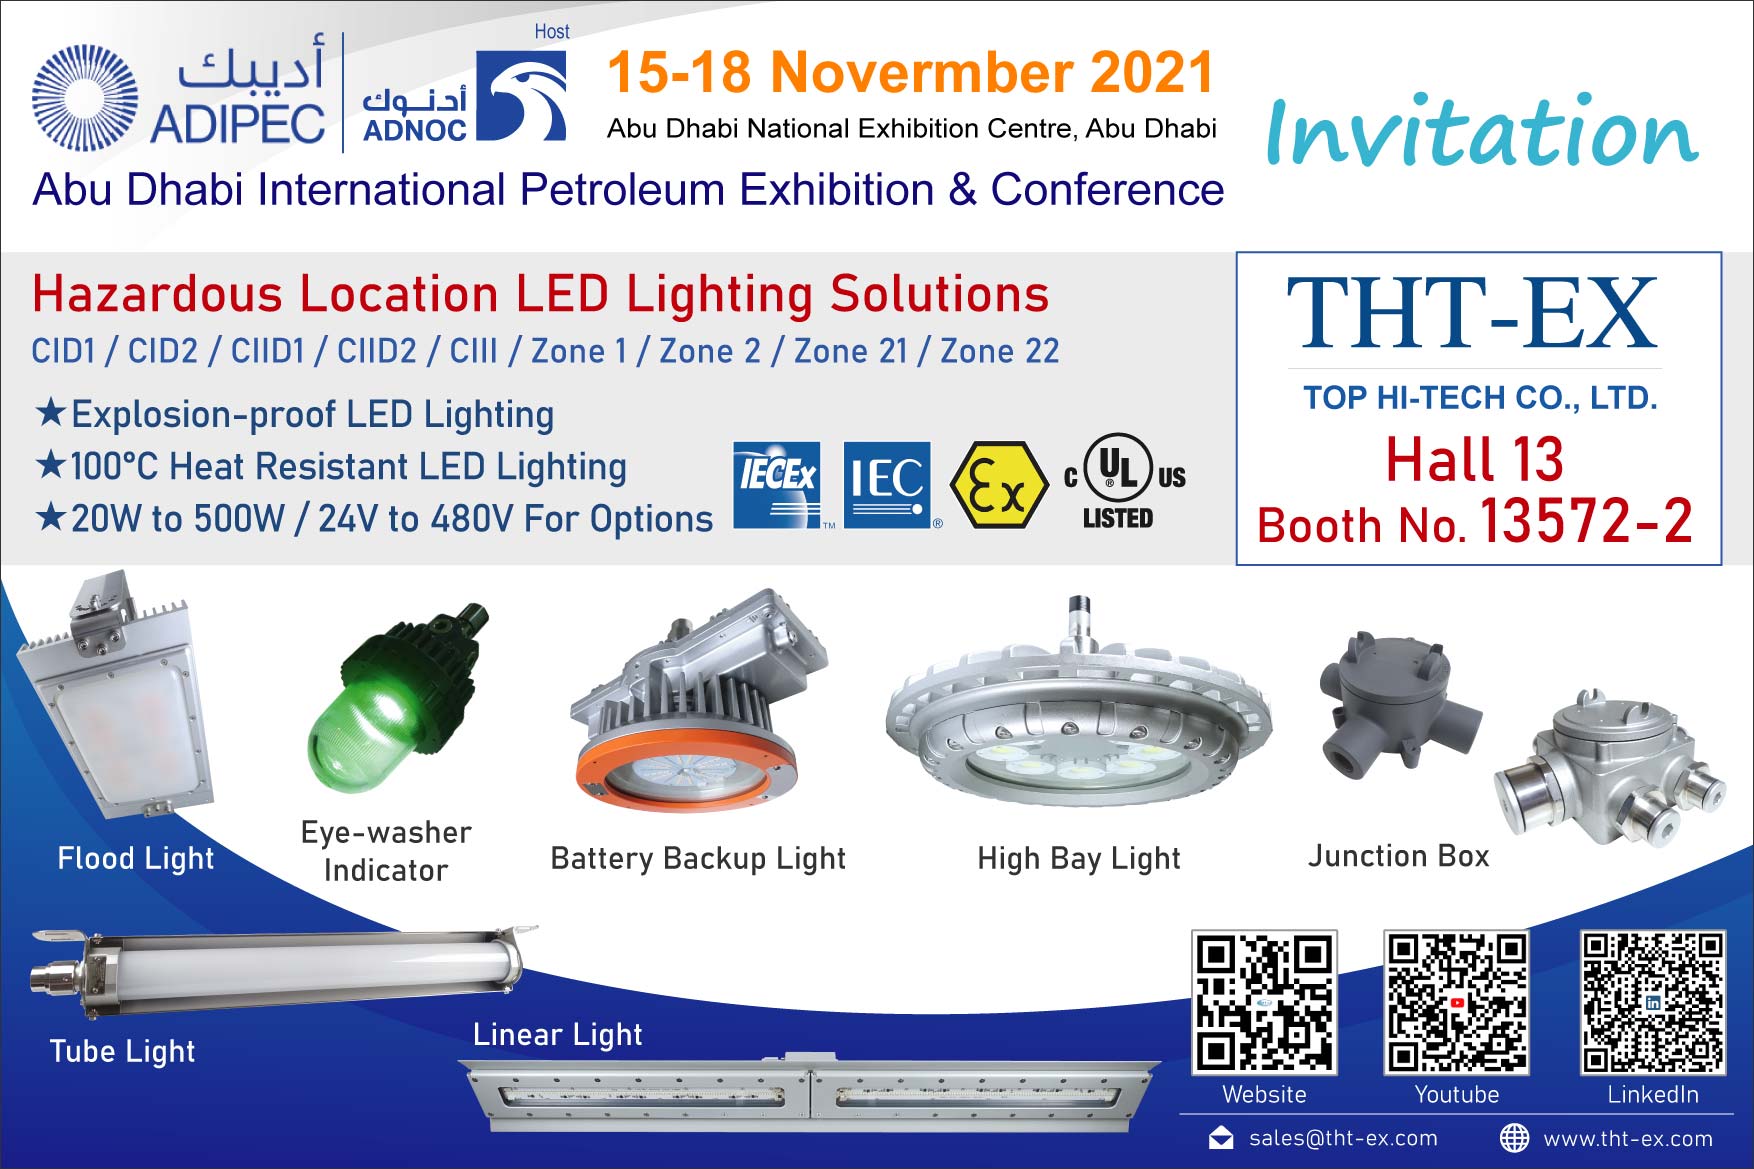  ADIPEC 2021, Welcome to Visit THT-EX Booth (No. 13572-2)